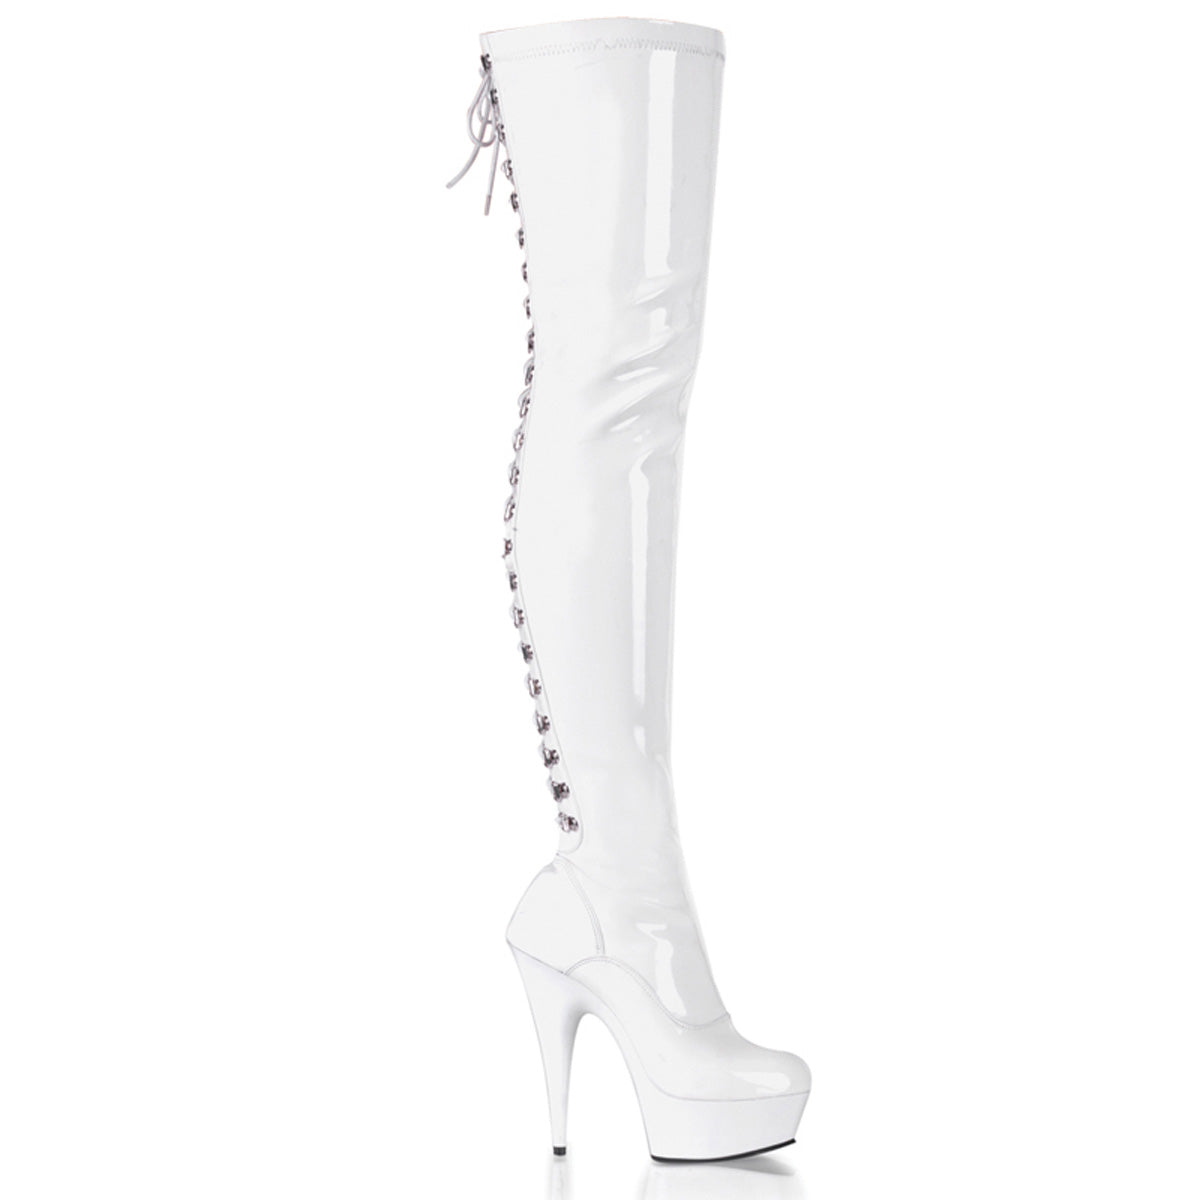 DELIGHT-3063 6 Inch Heel White Patent Pole Dancing Platforms-Pleaser- Sexy Shoes